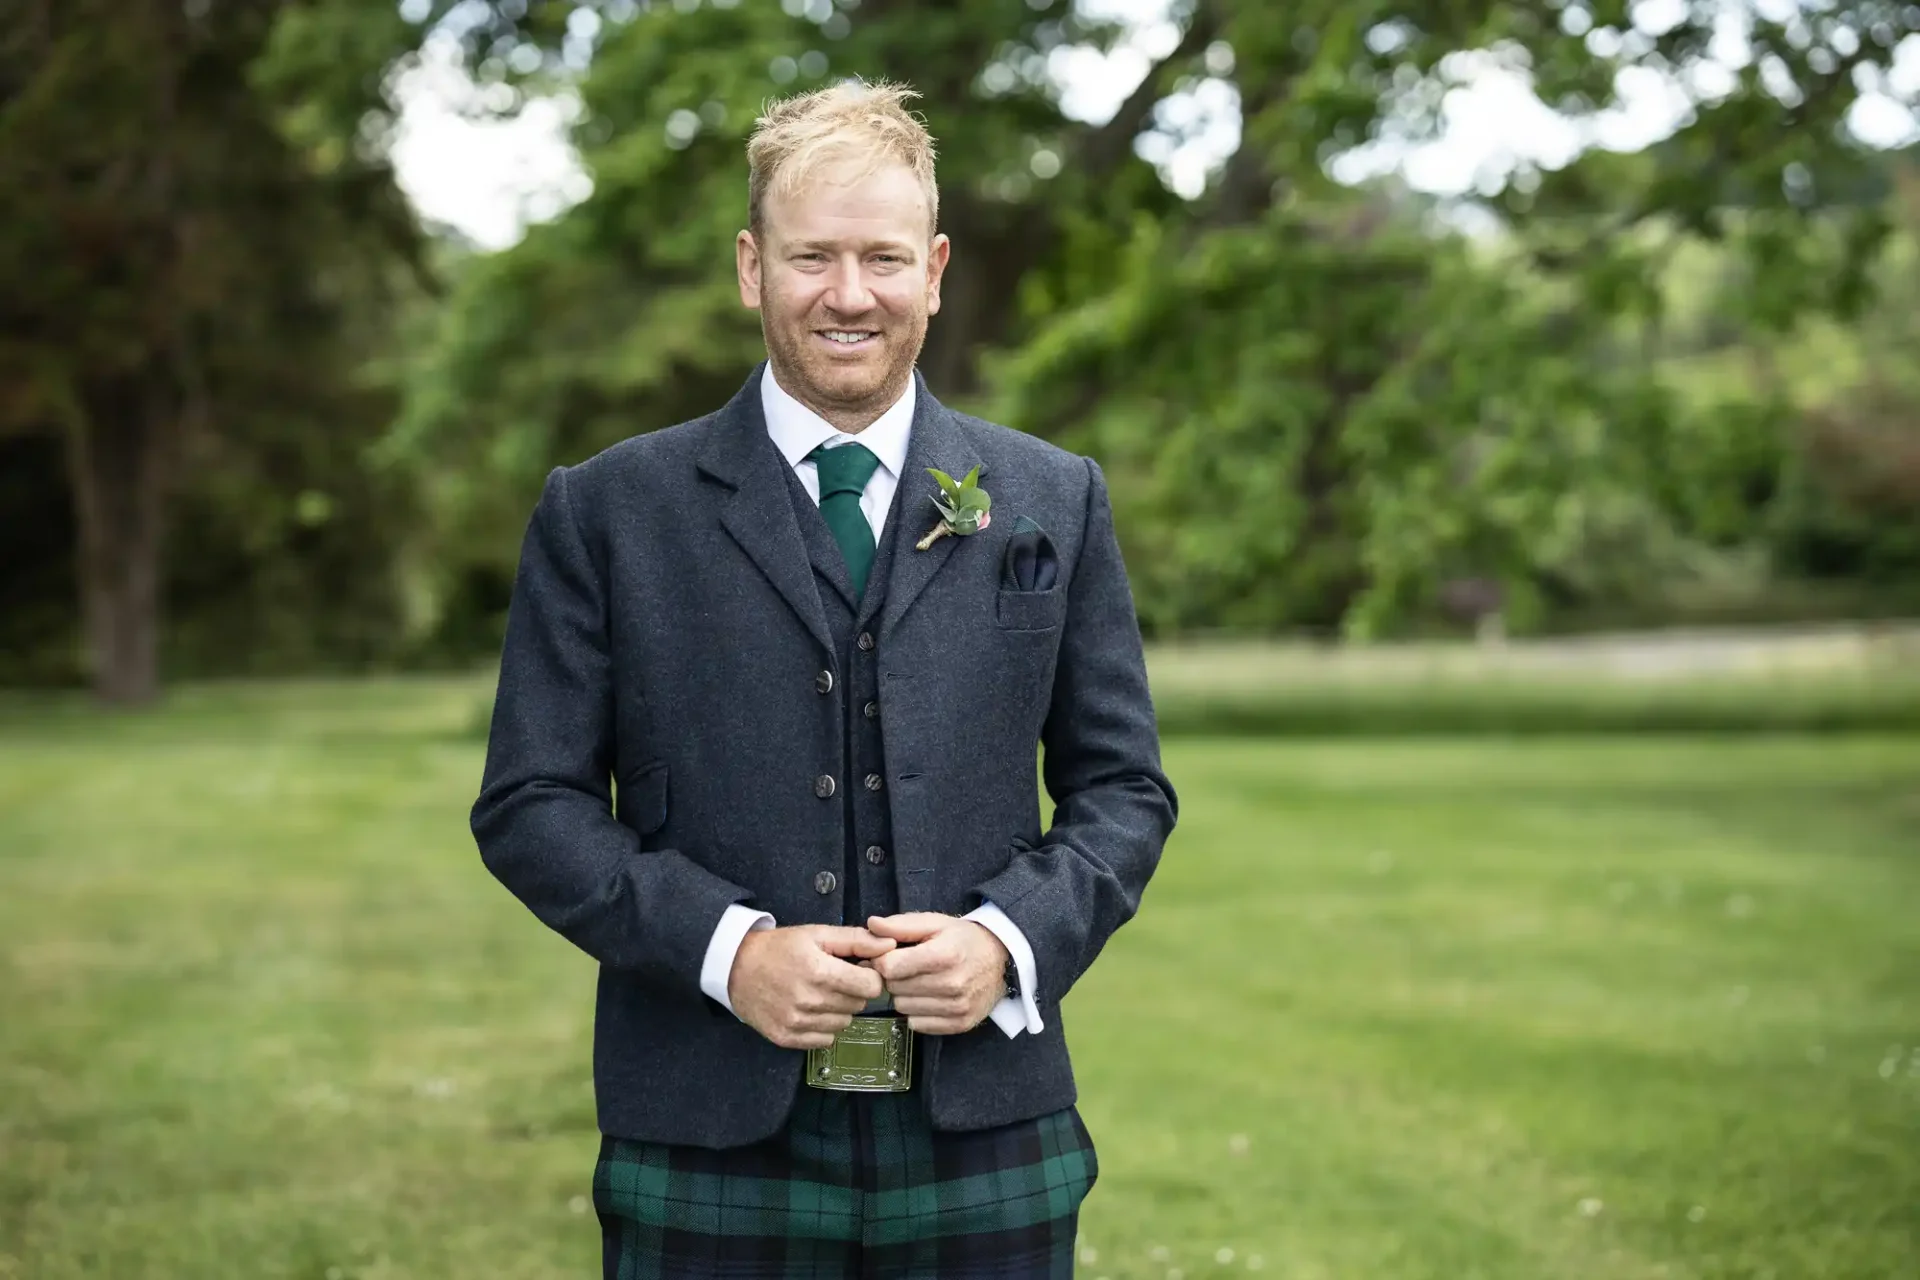 A man in a traditional scottish kilt and tweed jacket smiles outdoors, holding a glass, with a boutonniere on his lapel.